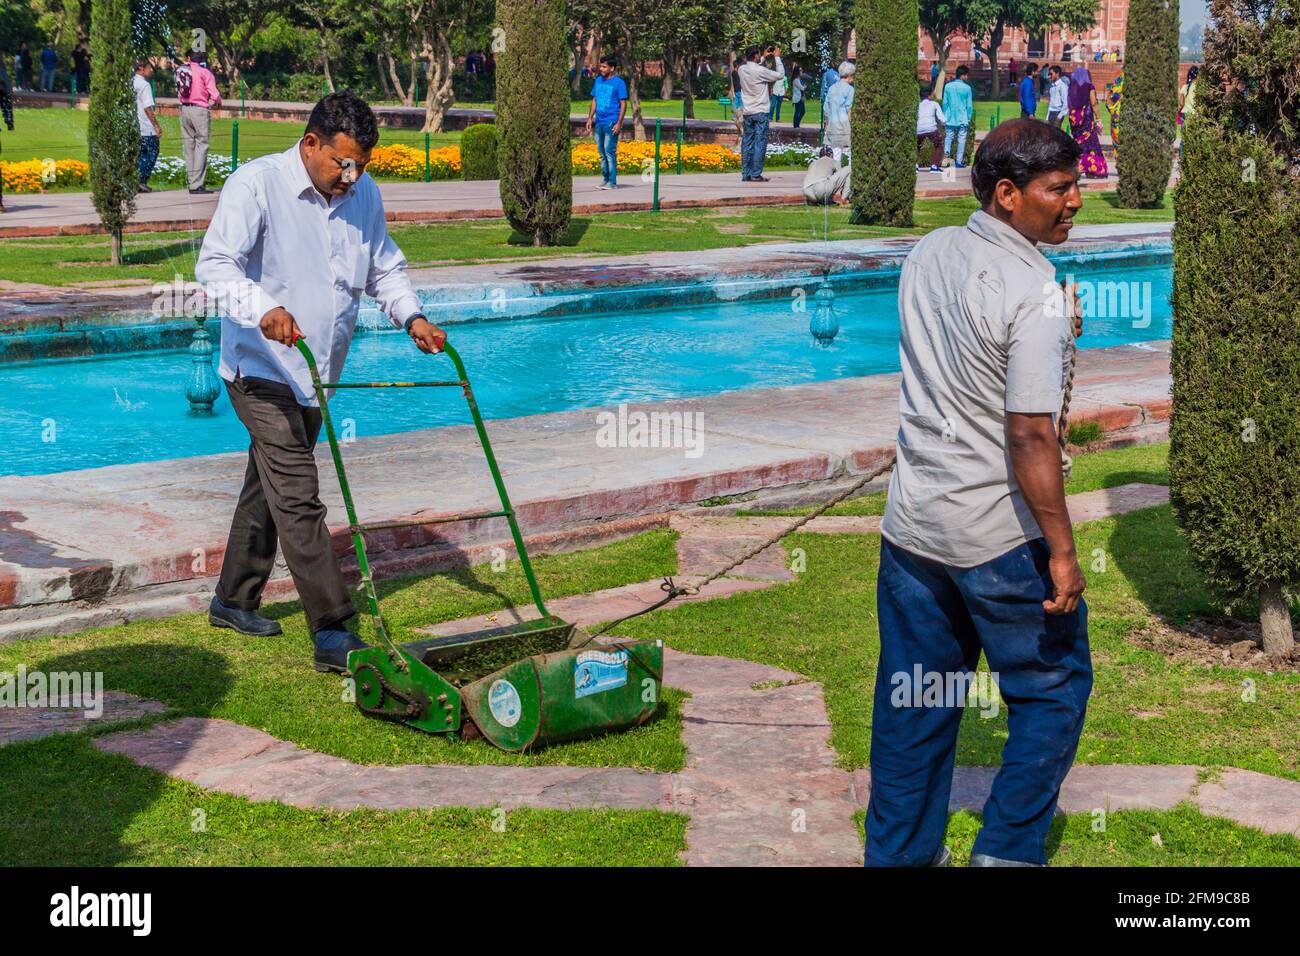 AGRA, INDIA - FEBRUARY 19, 2017: Workers are mowing a lawn Taj Mahal complex in Agra, India Stock Photo